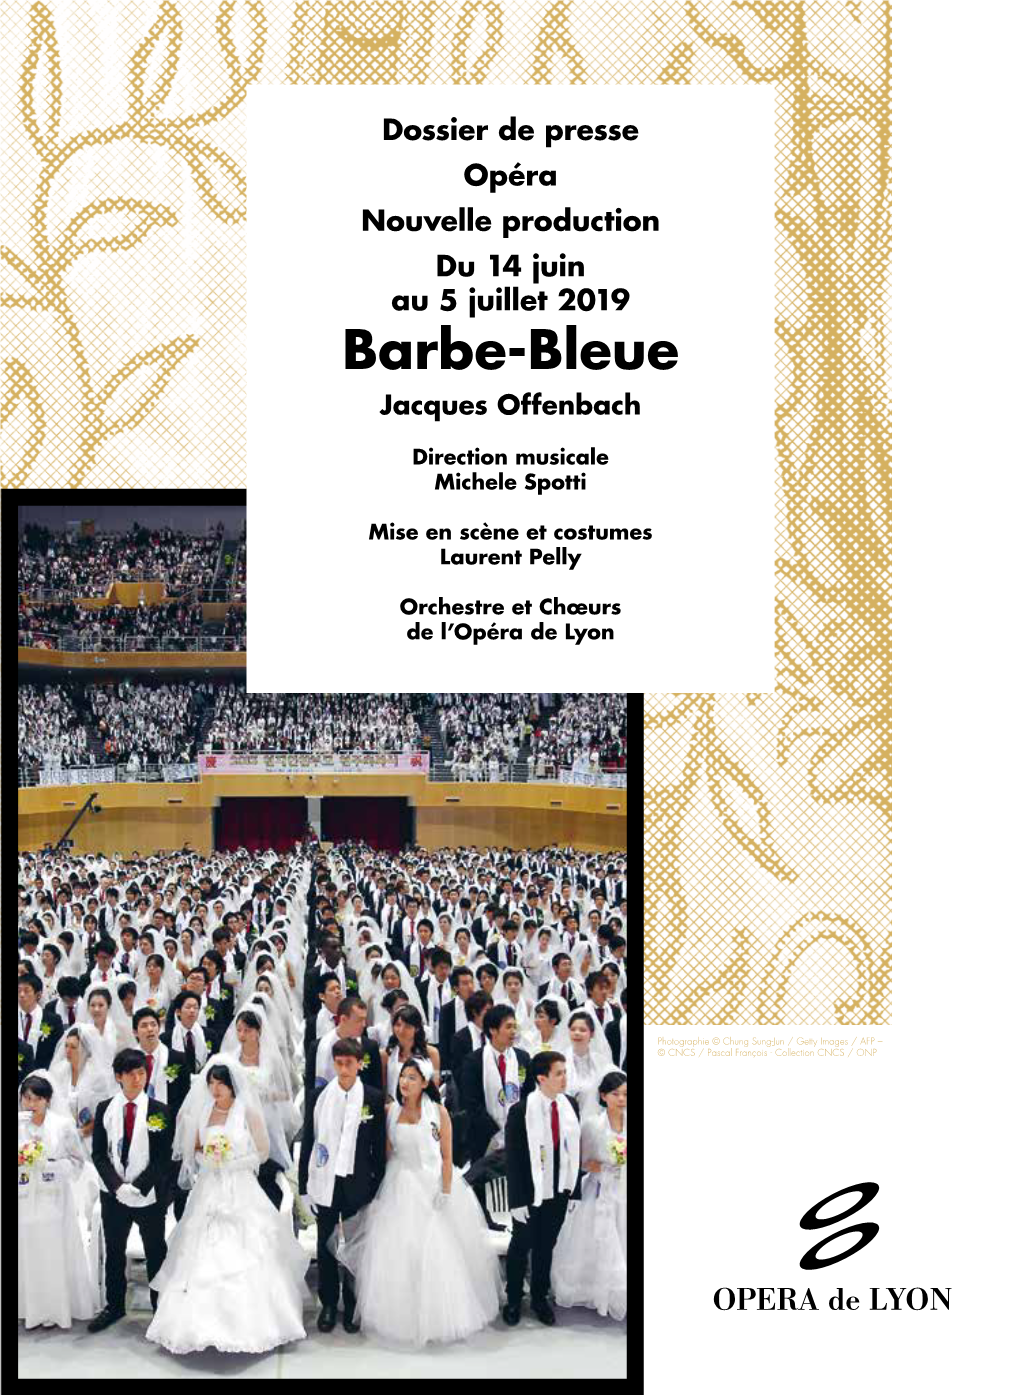 Barbe-Bleue Jacques Offenbach